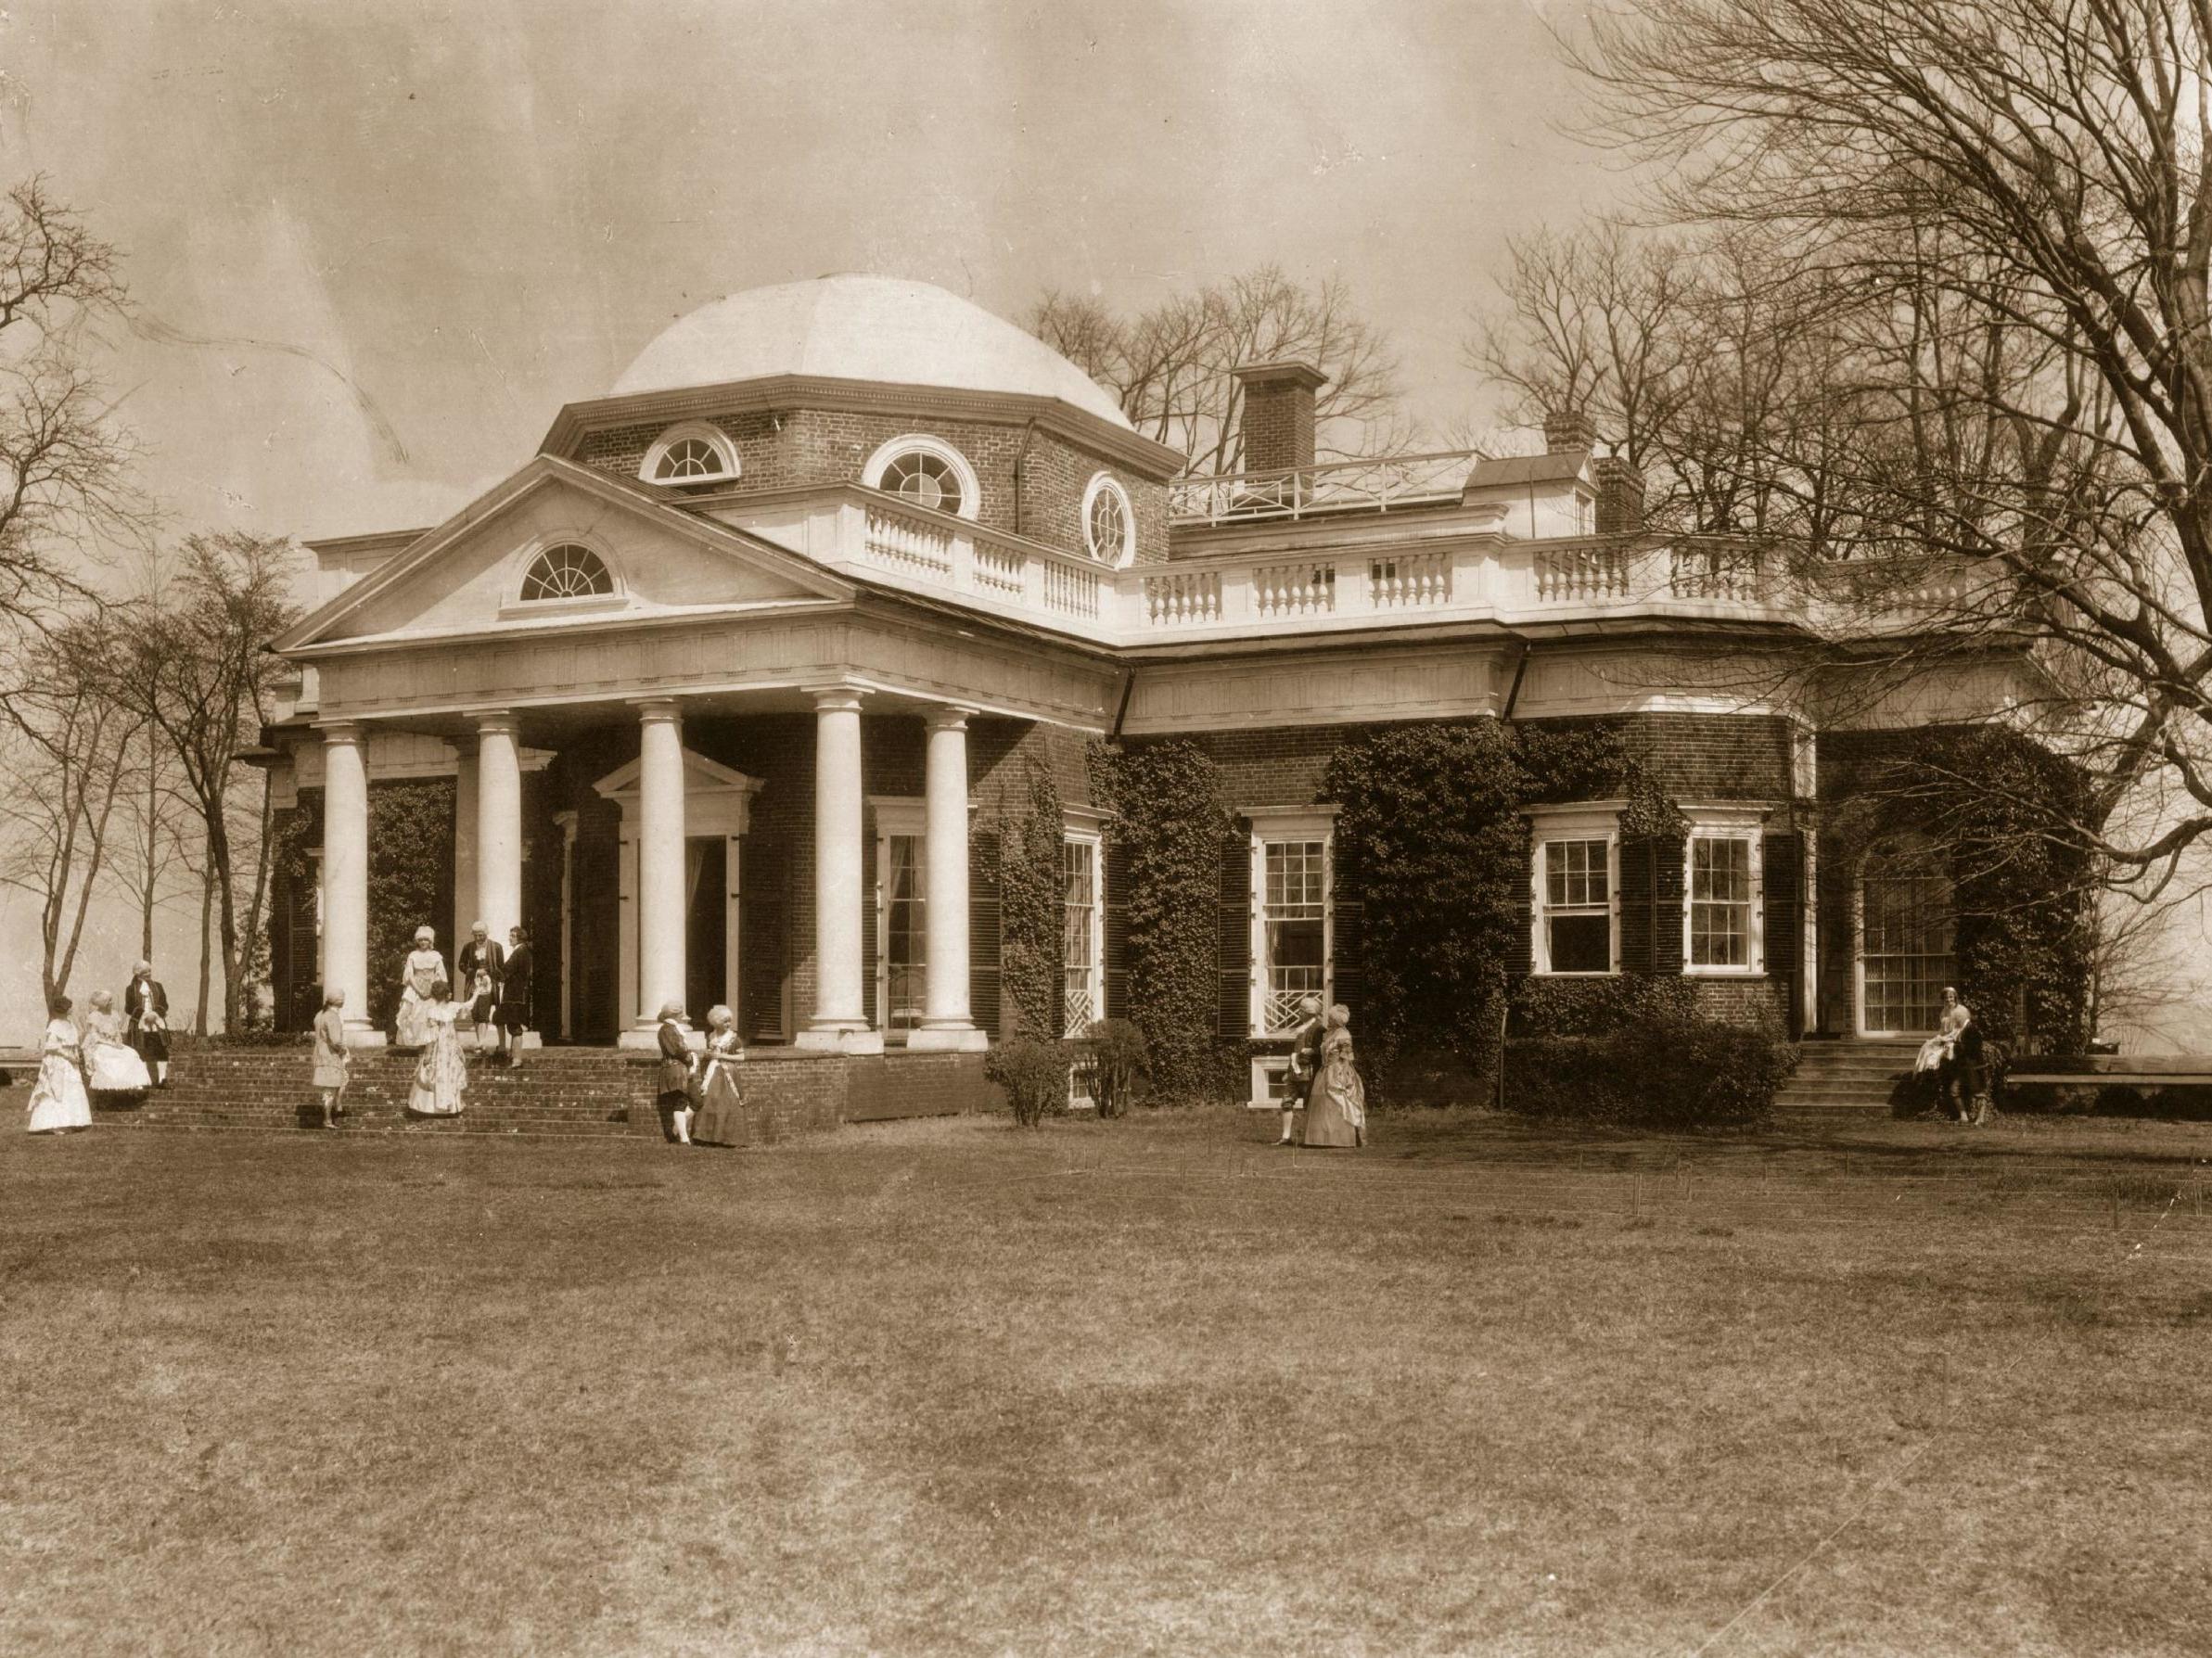 Research by Pulitzer-winning historian details extent of abuse levelled at slaves at University of Virginia (pictured), founded by Thomas Jefferson